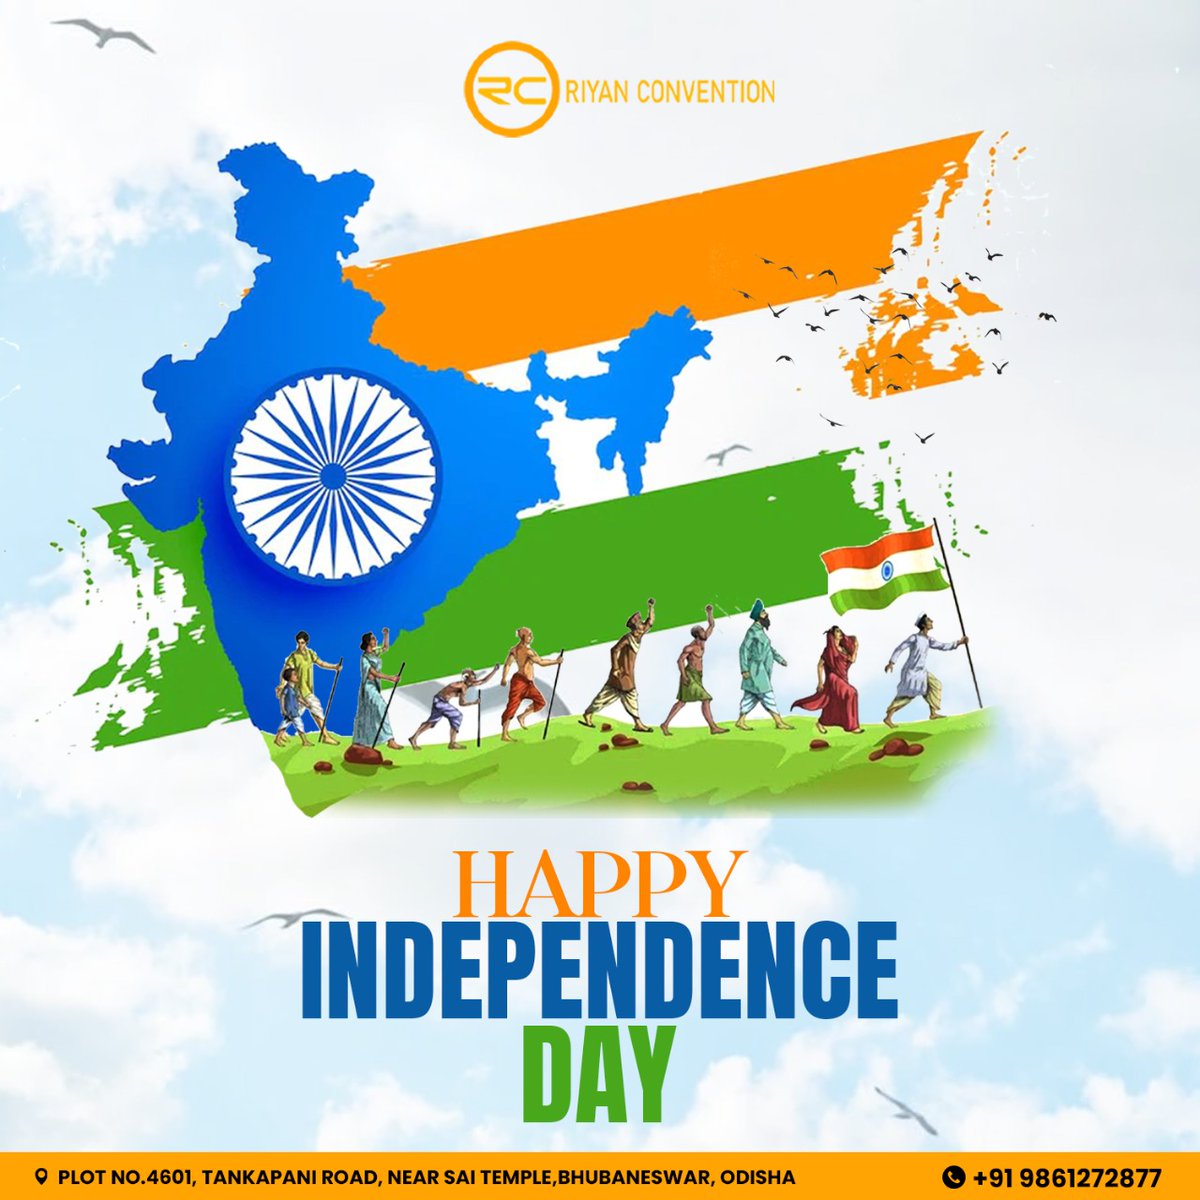 Freedom in mind, Faith in our heart, Memories in our souls. Let’s salute the Nation on Independence Day!
.
#independenceday #independencedayindia #india #august #happyindependenceday #independence #freedom #jaihind #independencedaycelebration #indian #indianindependenceday